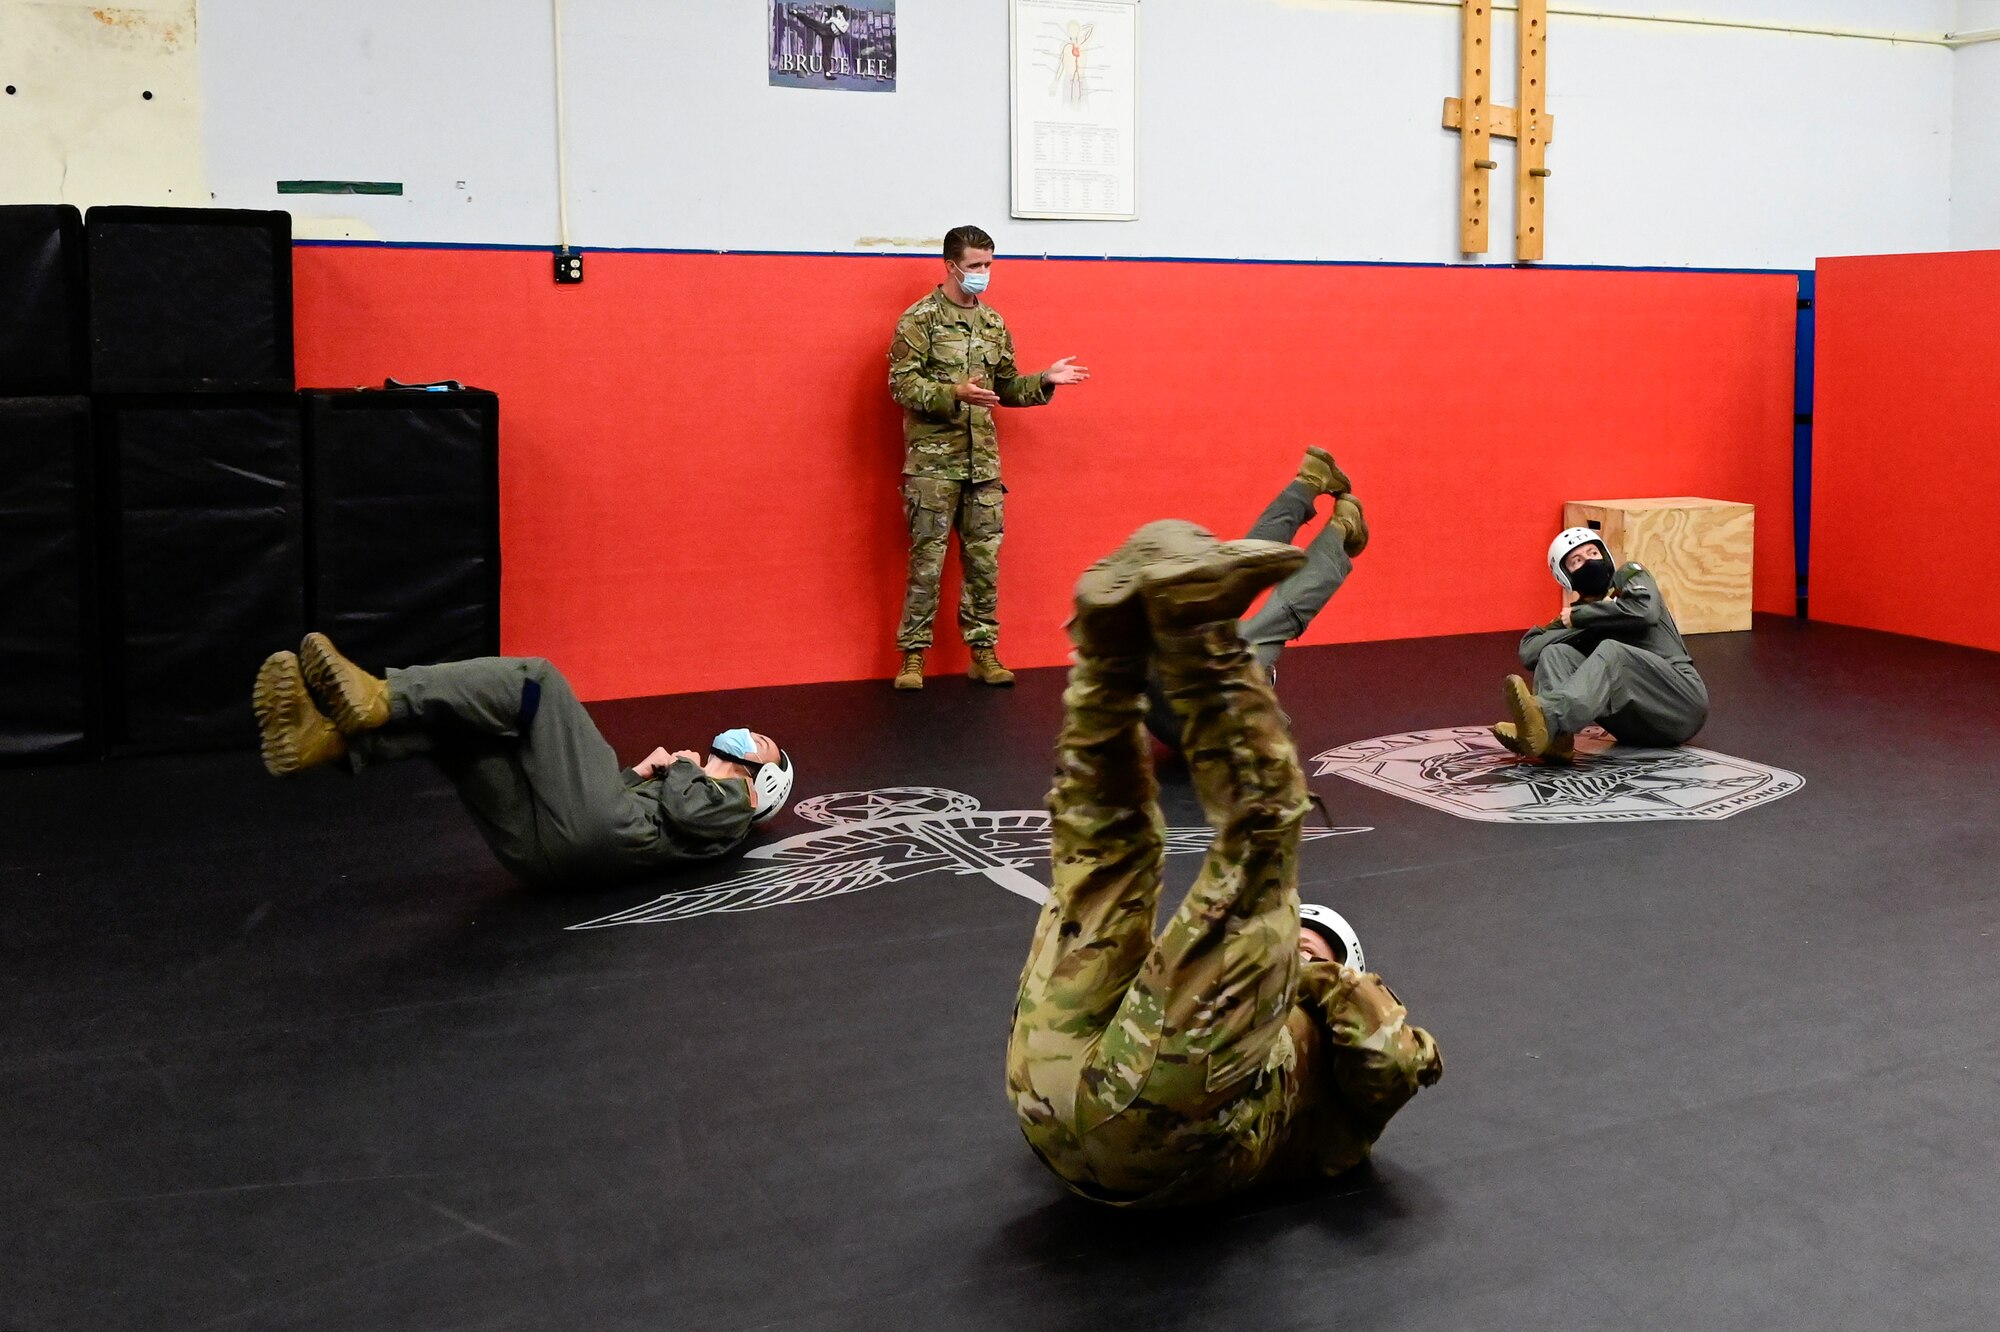 An instructor directs students during jump training.